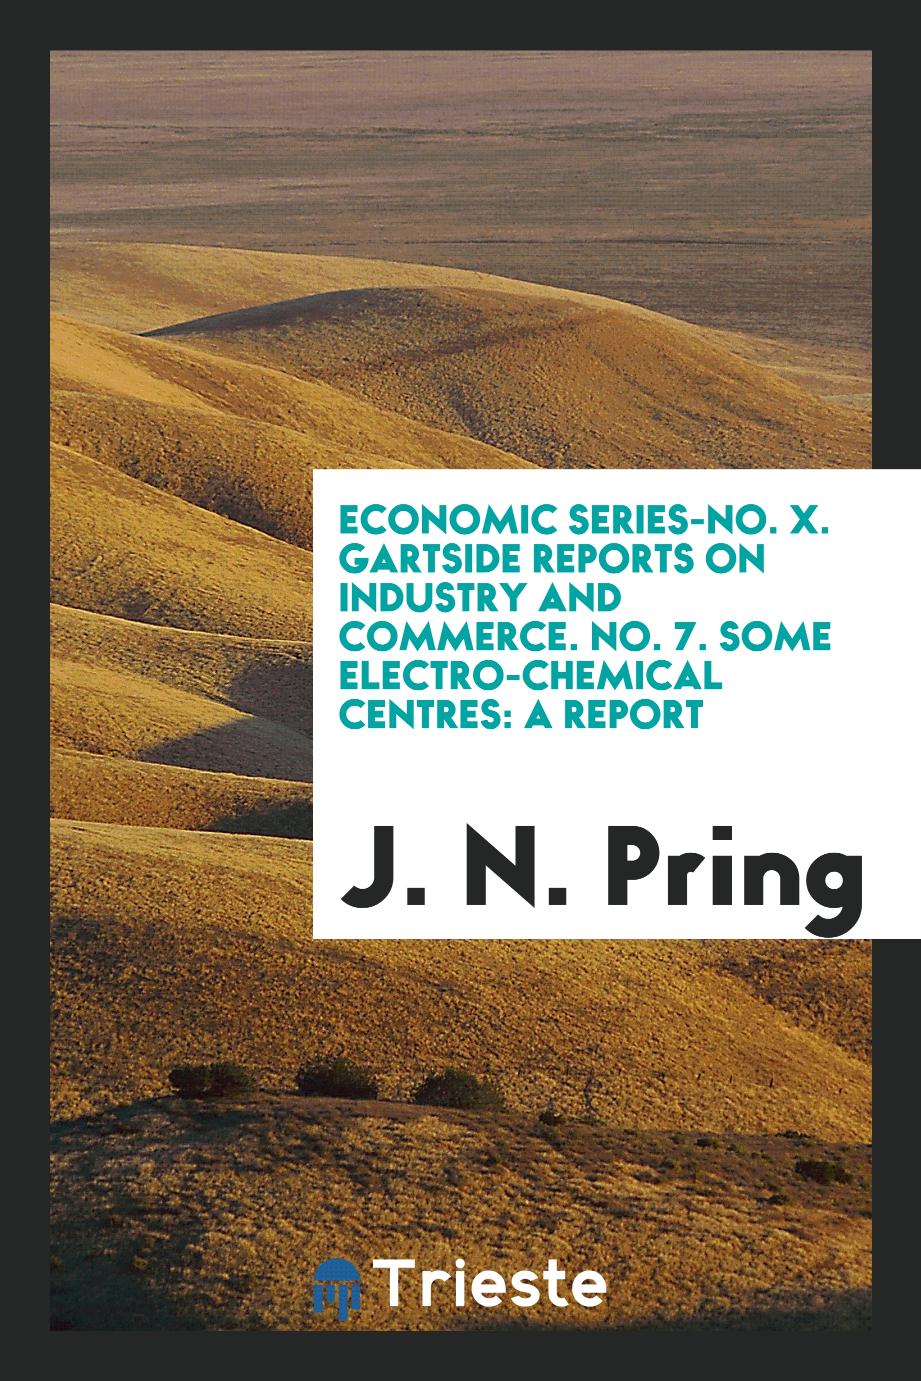 Economic Series-No. X. Gartside Reports on Industry and Commerce. No. 7. Some Electro-chemical Centres: A Report